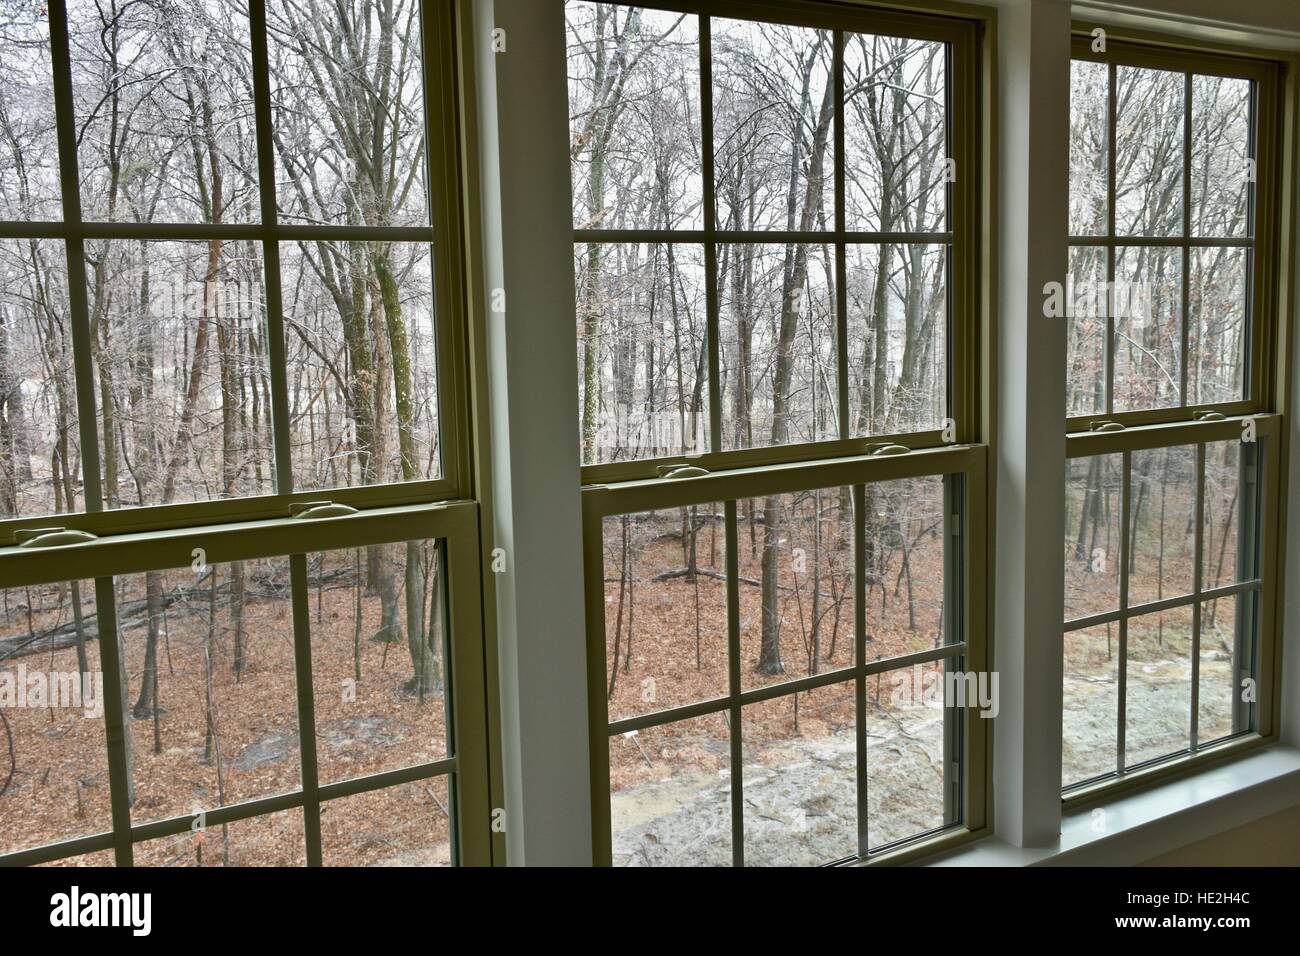 A view a wooded landscape from inside a home Stock Photo